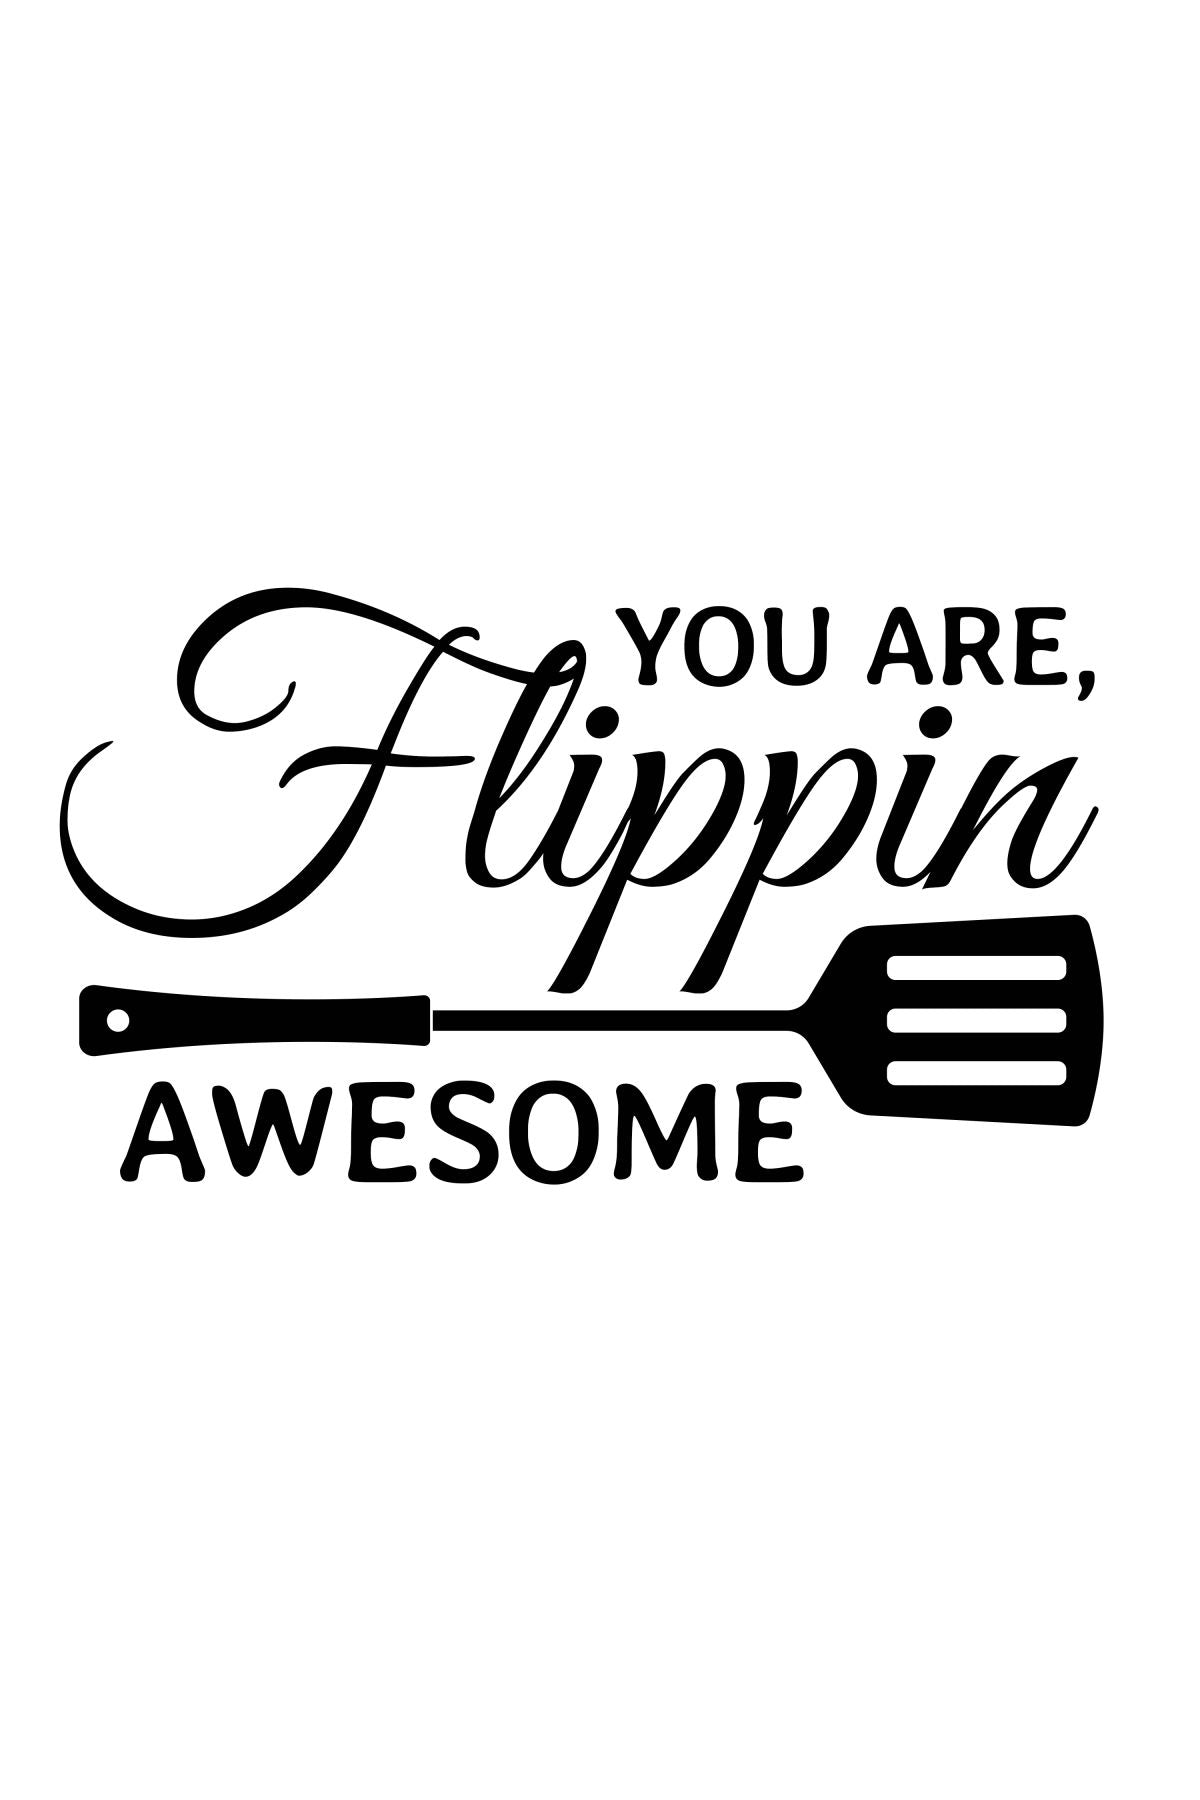 Flippin' Awesome